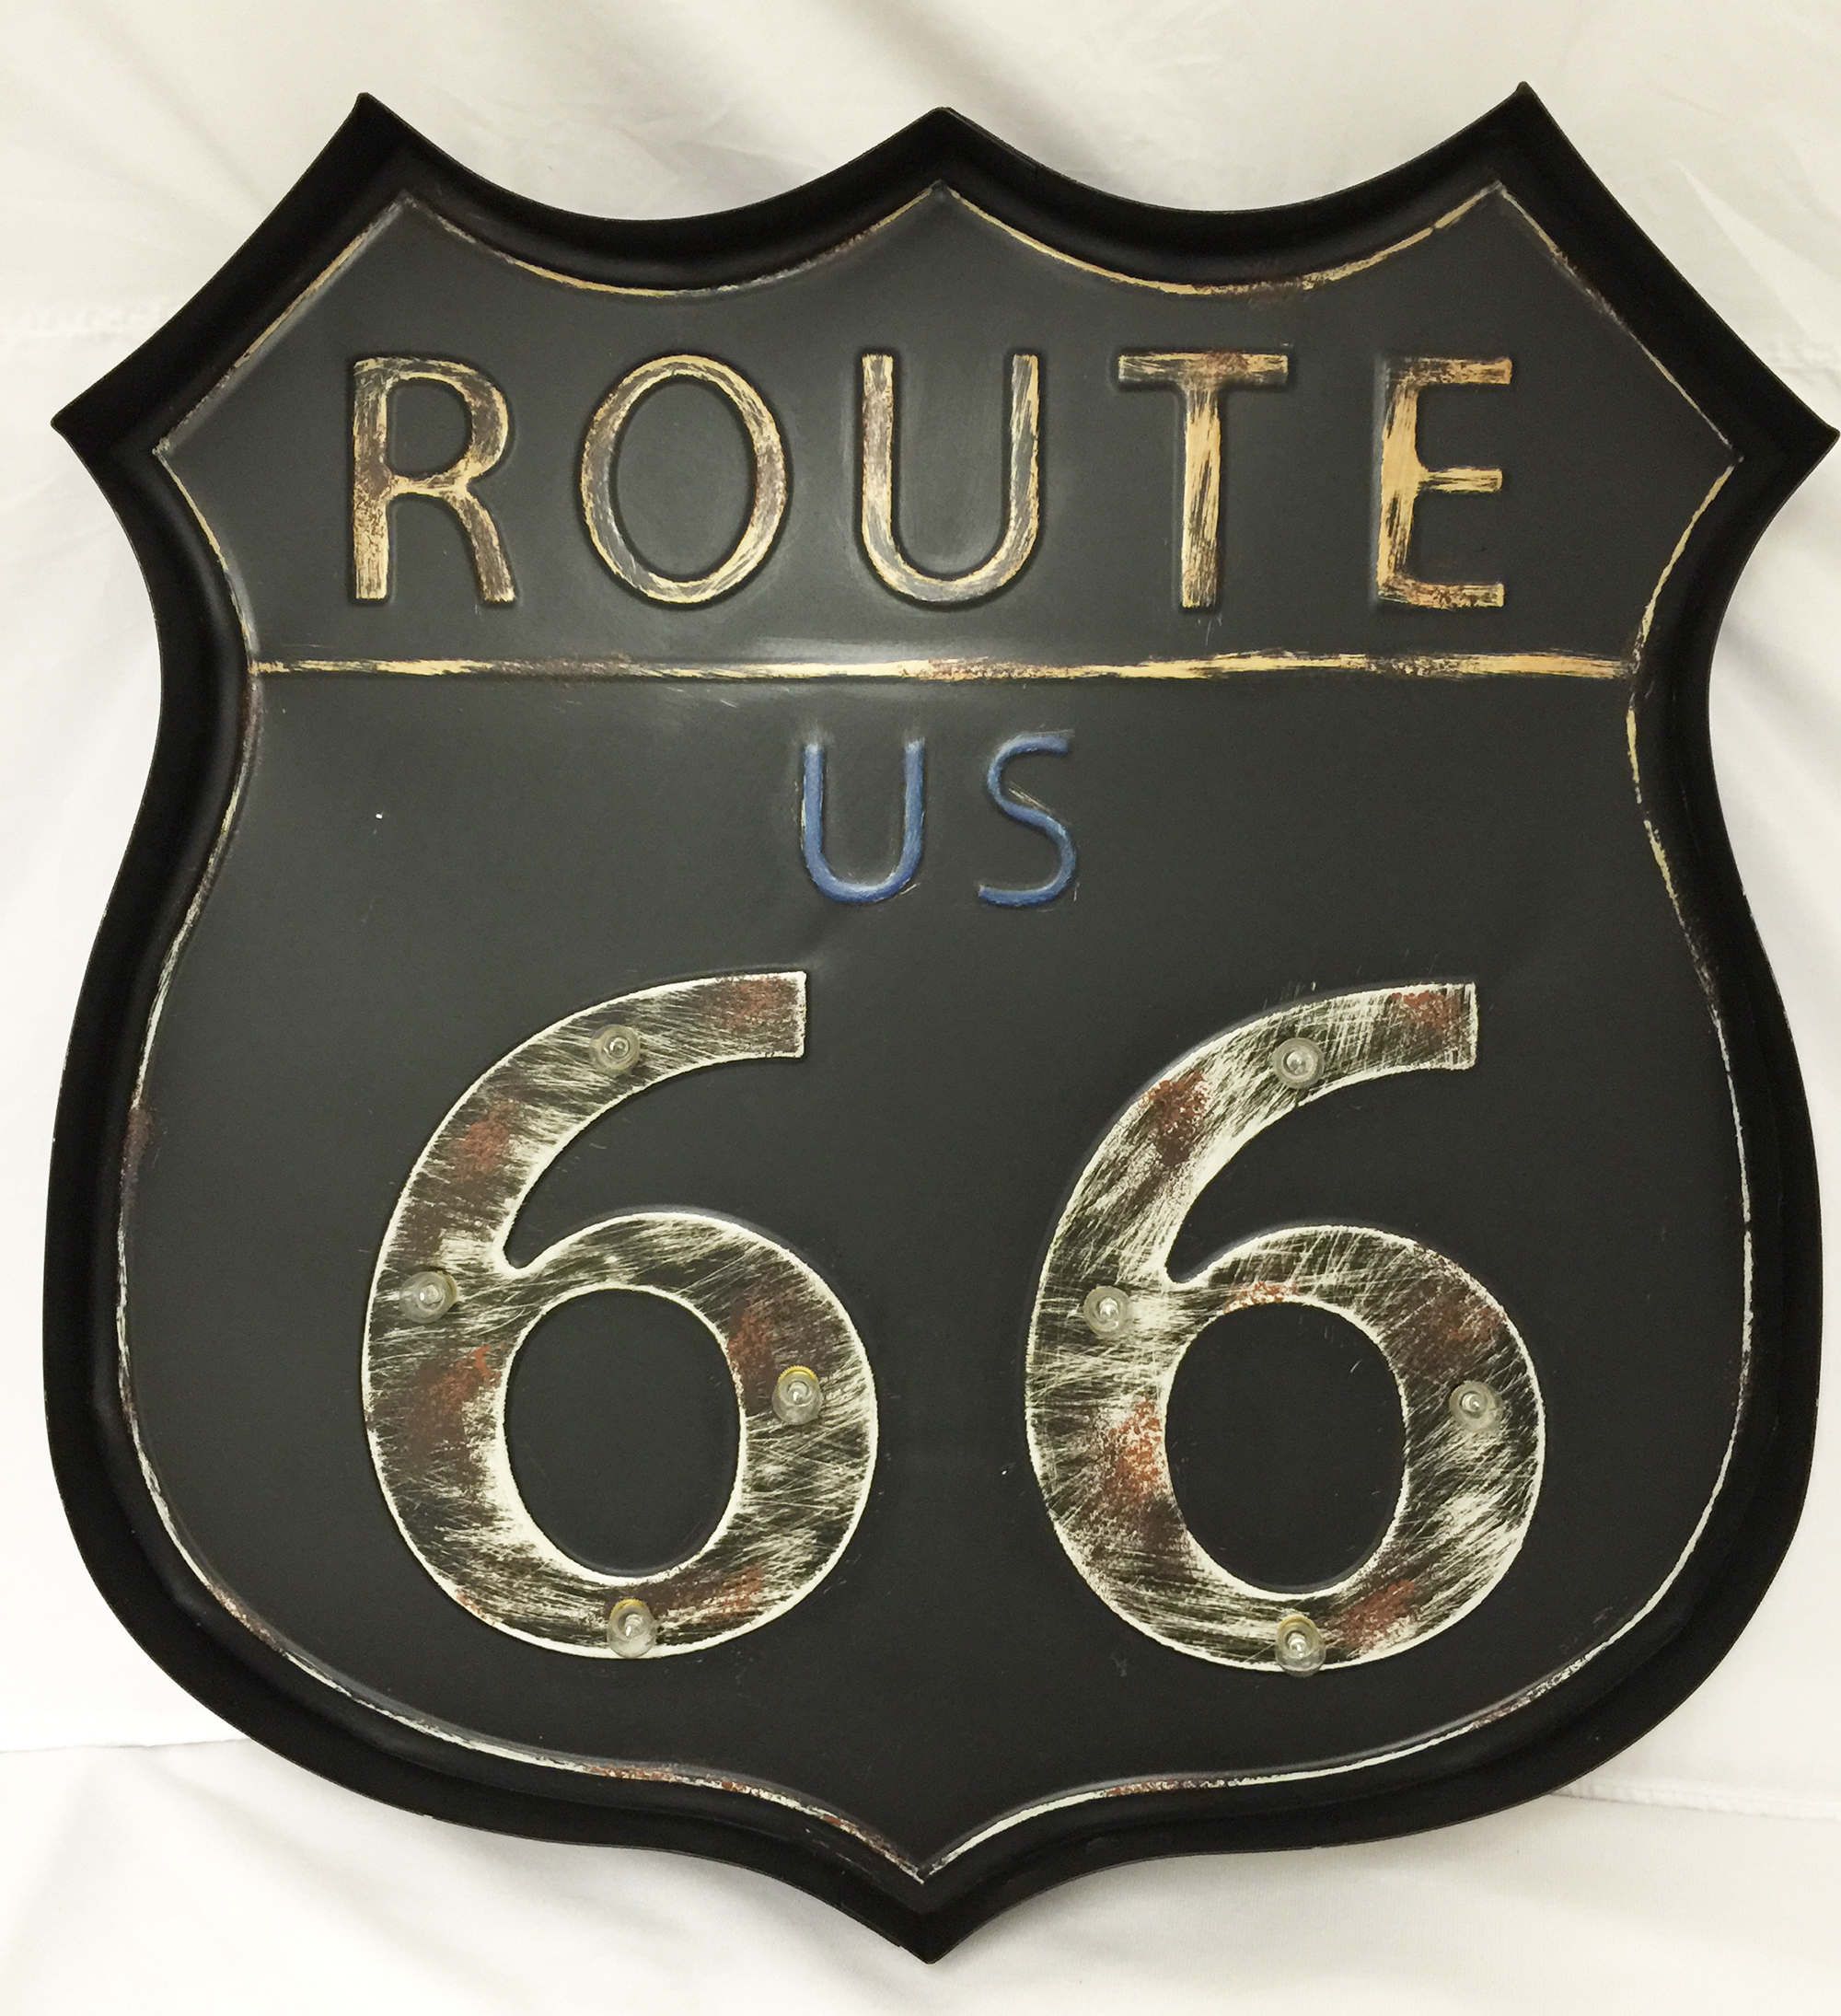 Creative Motion Industries Battery-operated Route 66 Metal Light